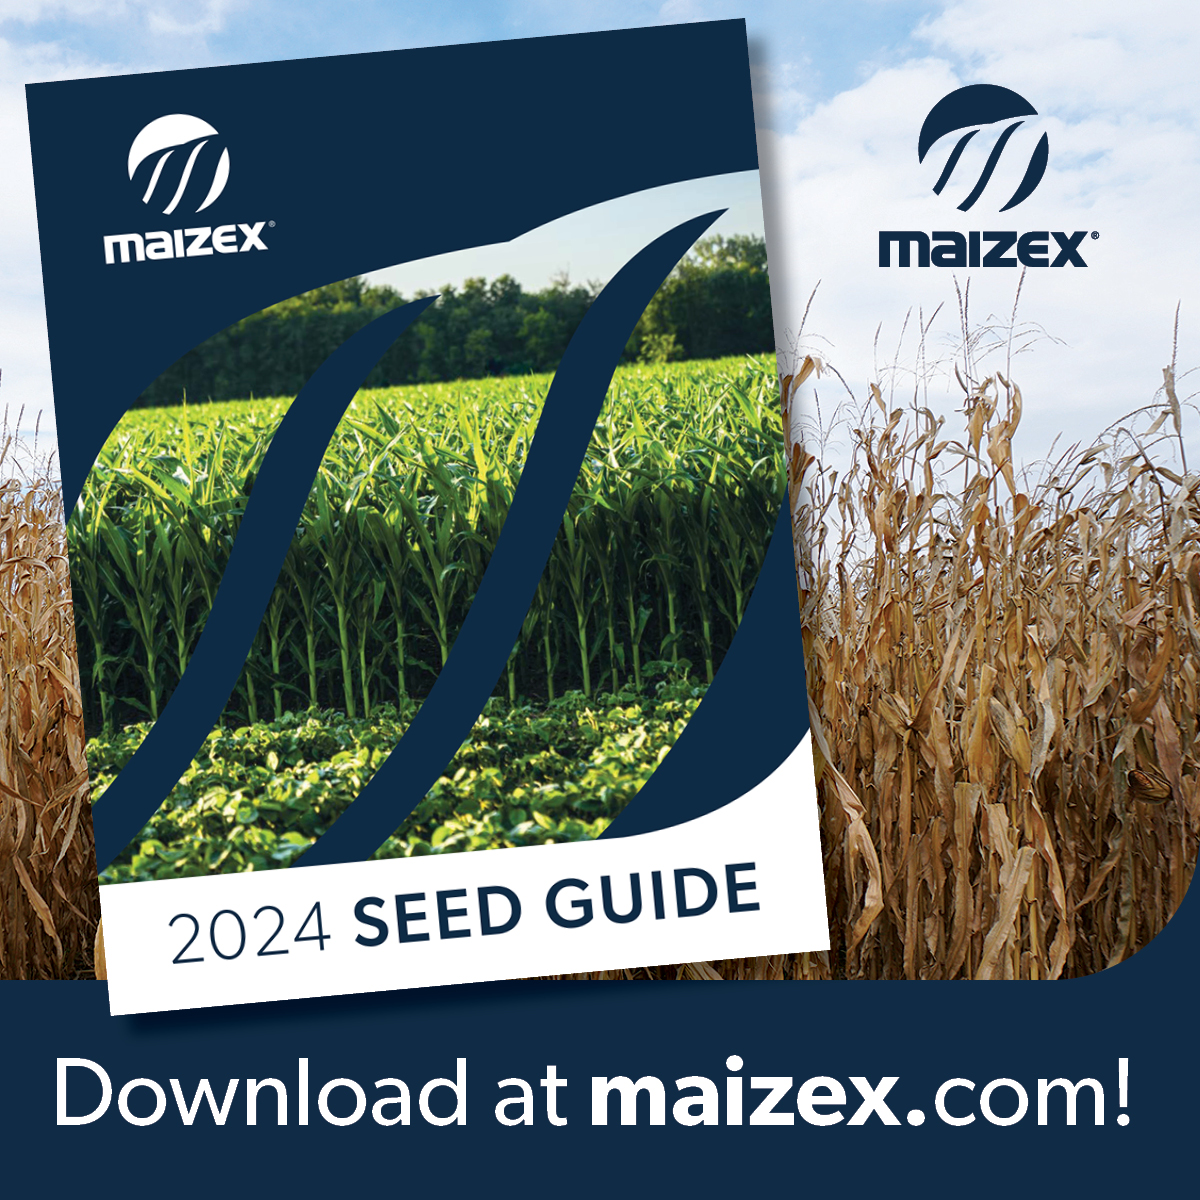 Need some last minute seed? Our 2024 seed guide is available to download here: bit.ly/MZeast24 Ask your #MaizexDealer which products are available and best for you. #fieldbyfield #Plant24 #CanadianGrownCanadianOwned